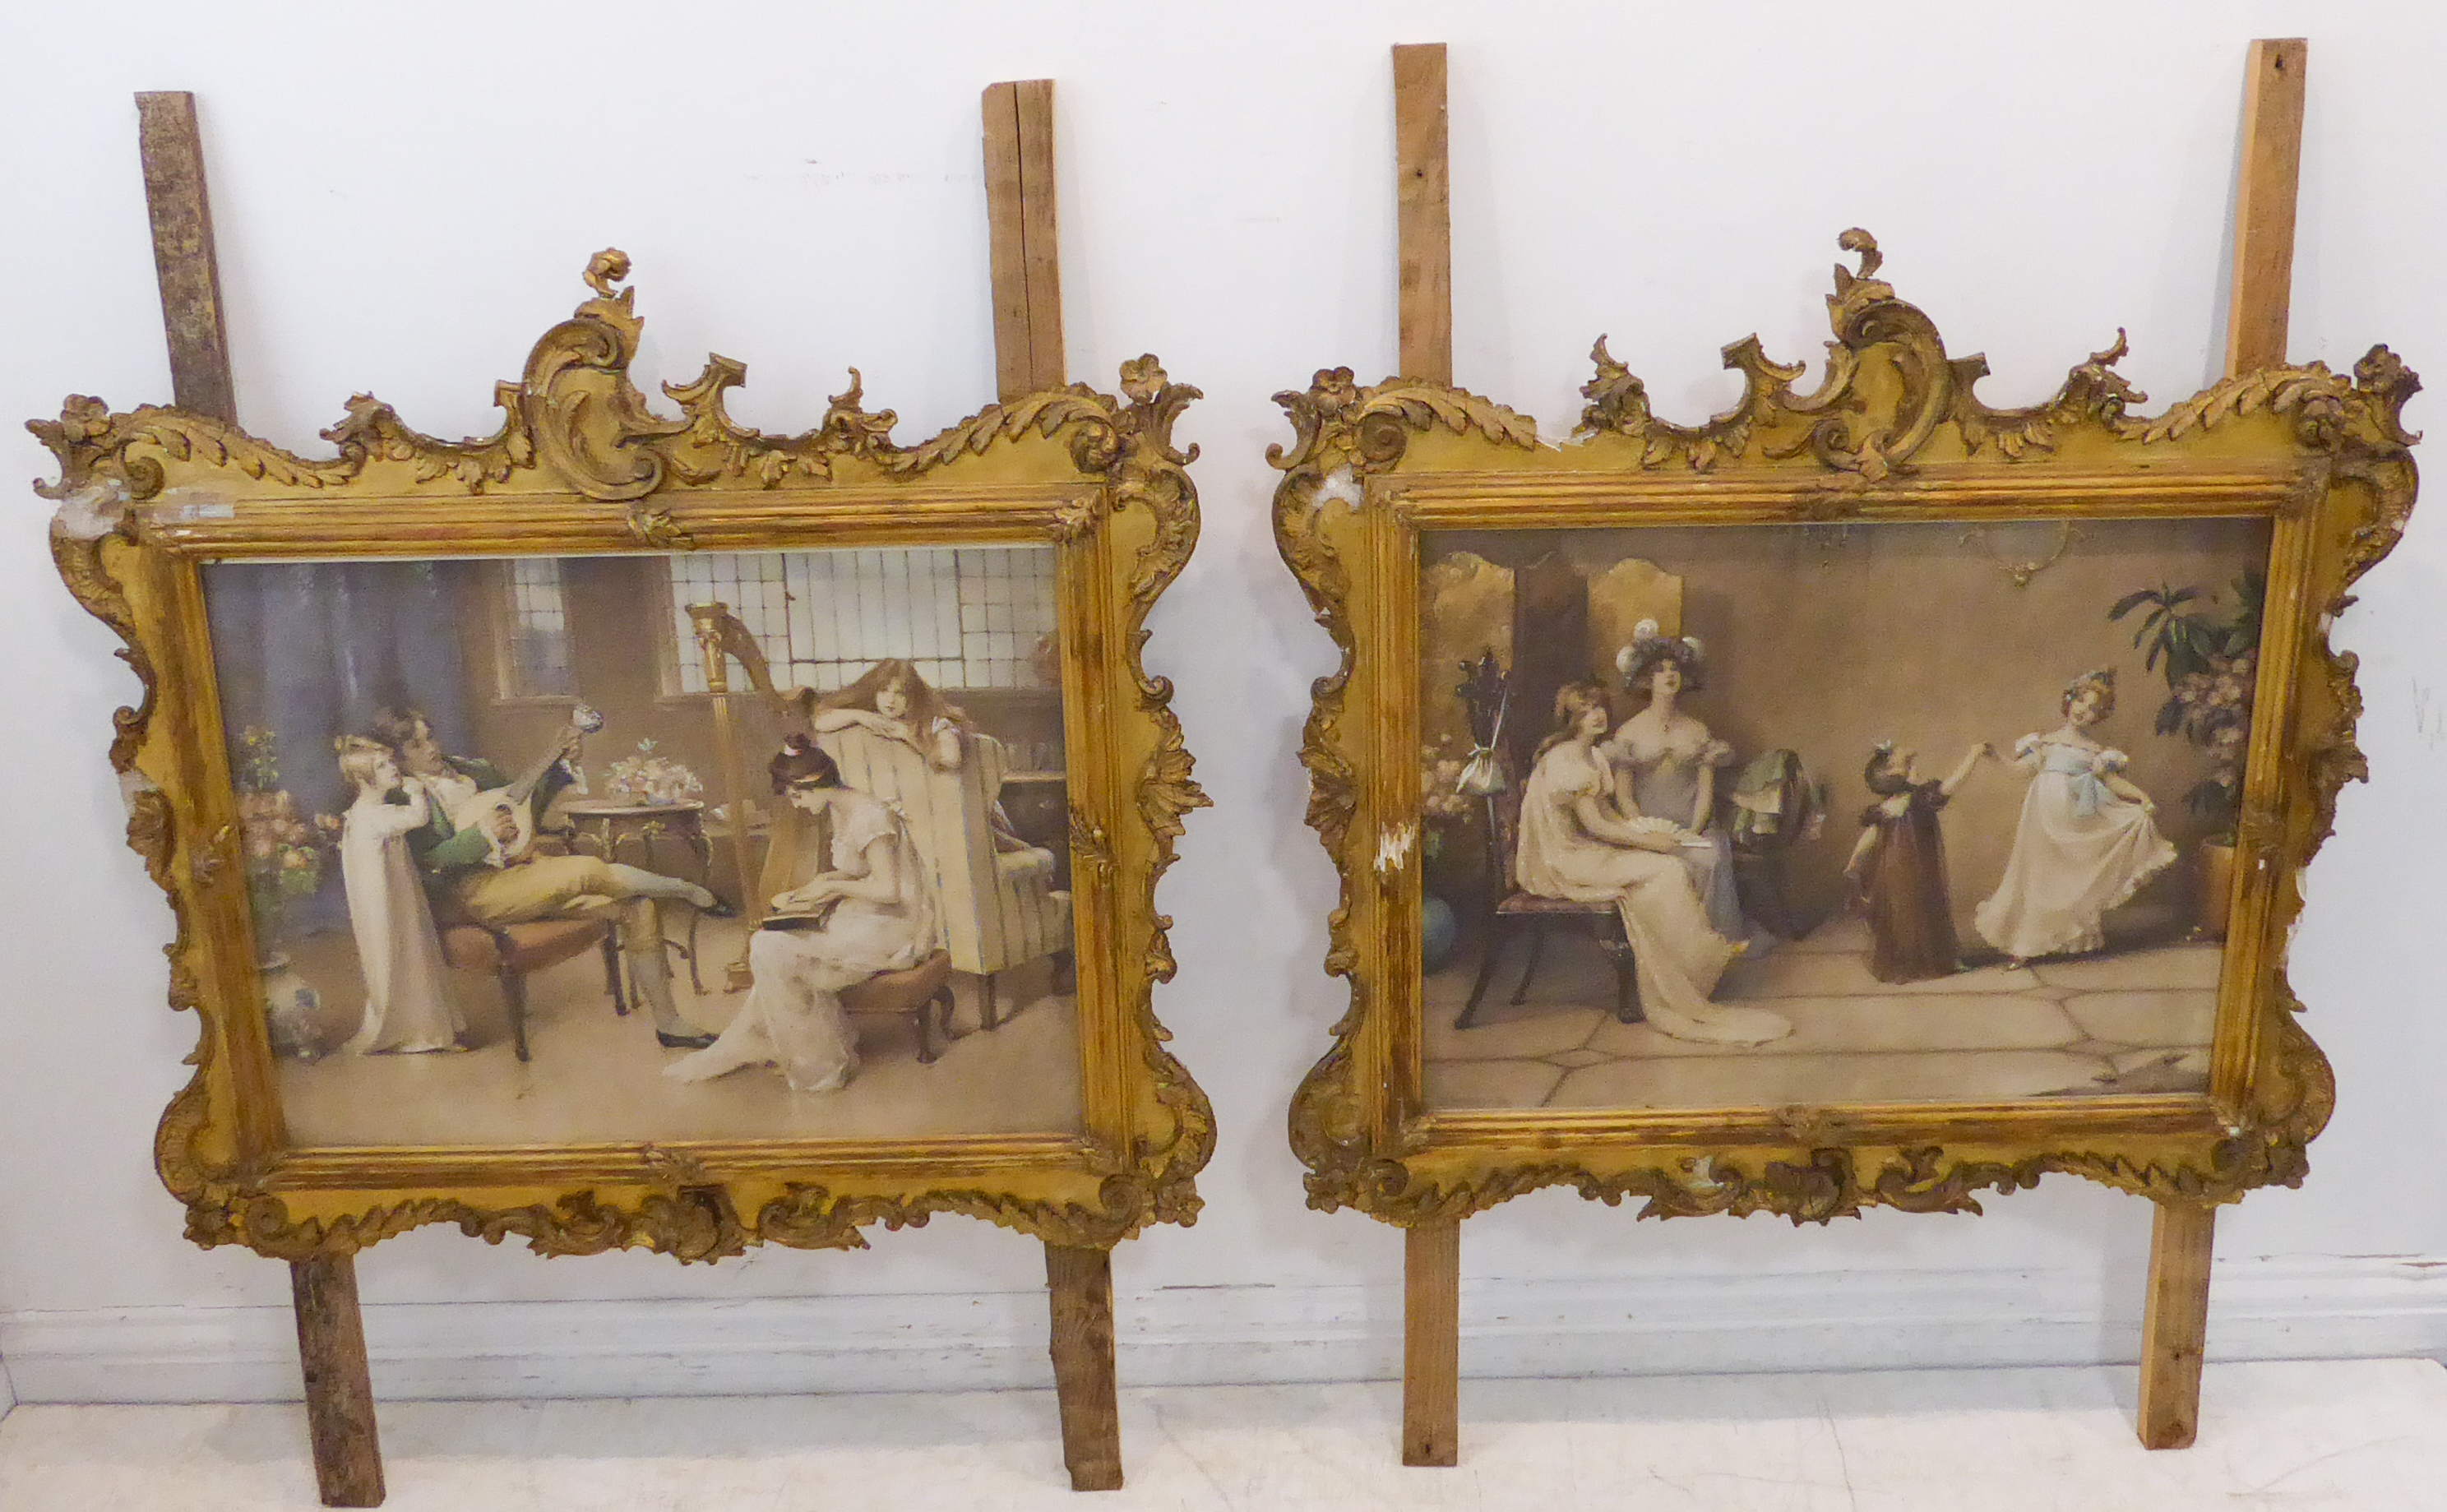 M. GOODMAN (fl. early 20th century) - A pair of ornately gilt-framed and glazed late 19th century